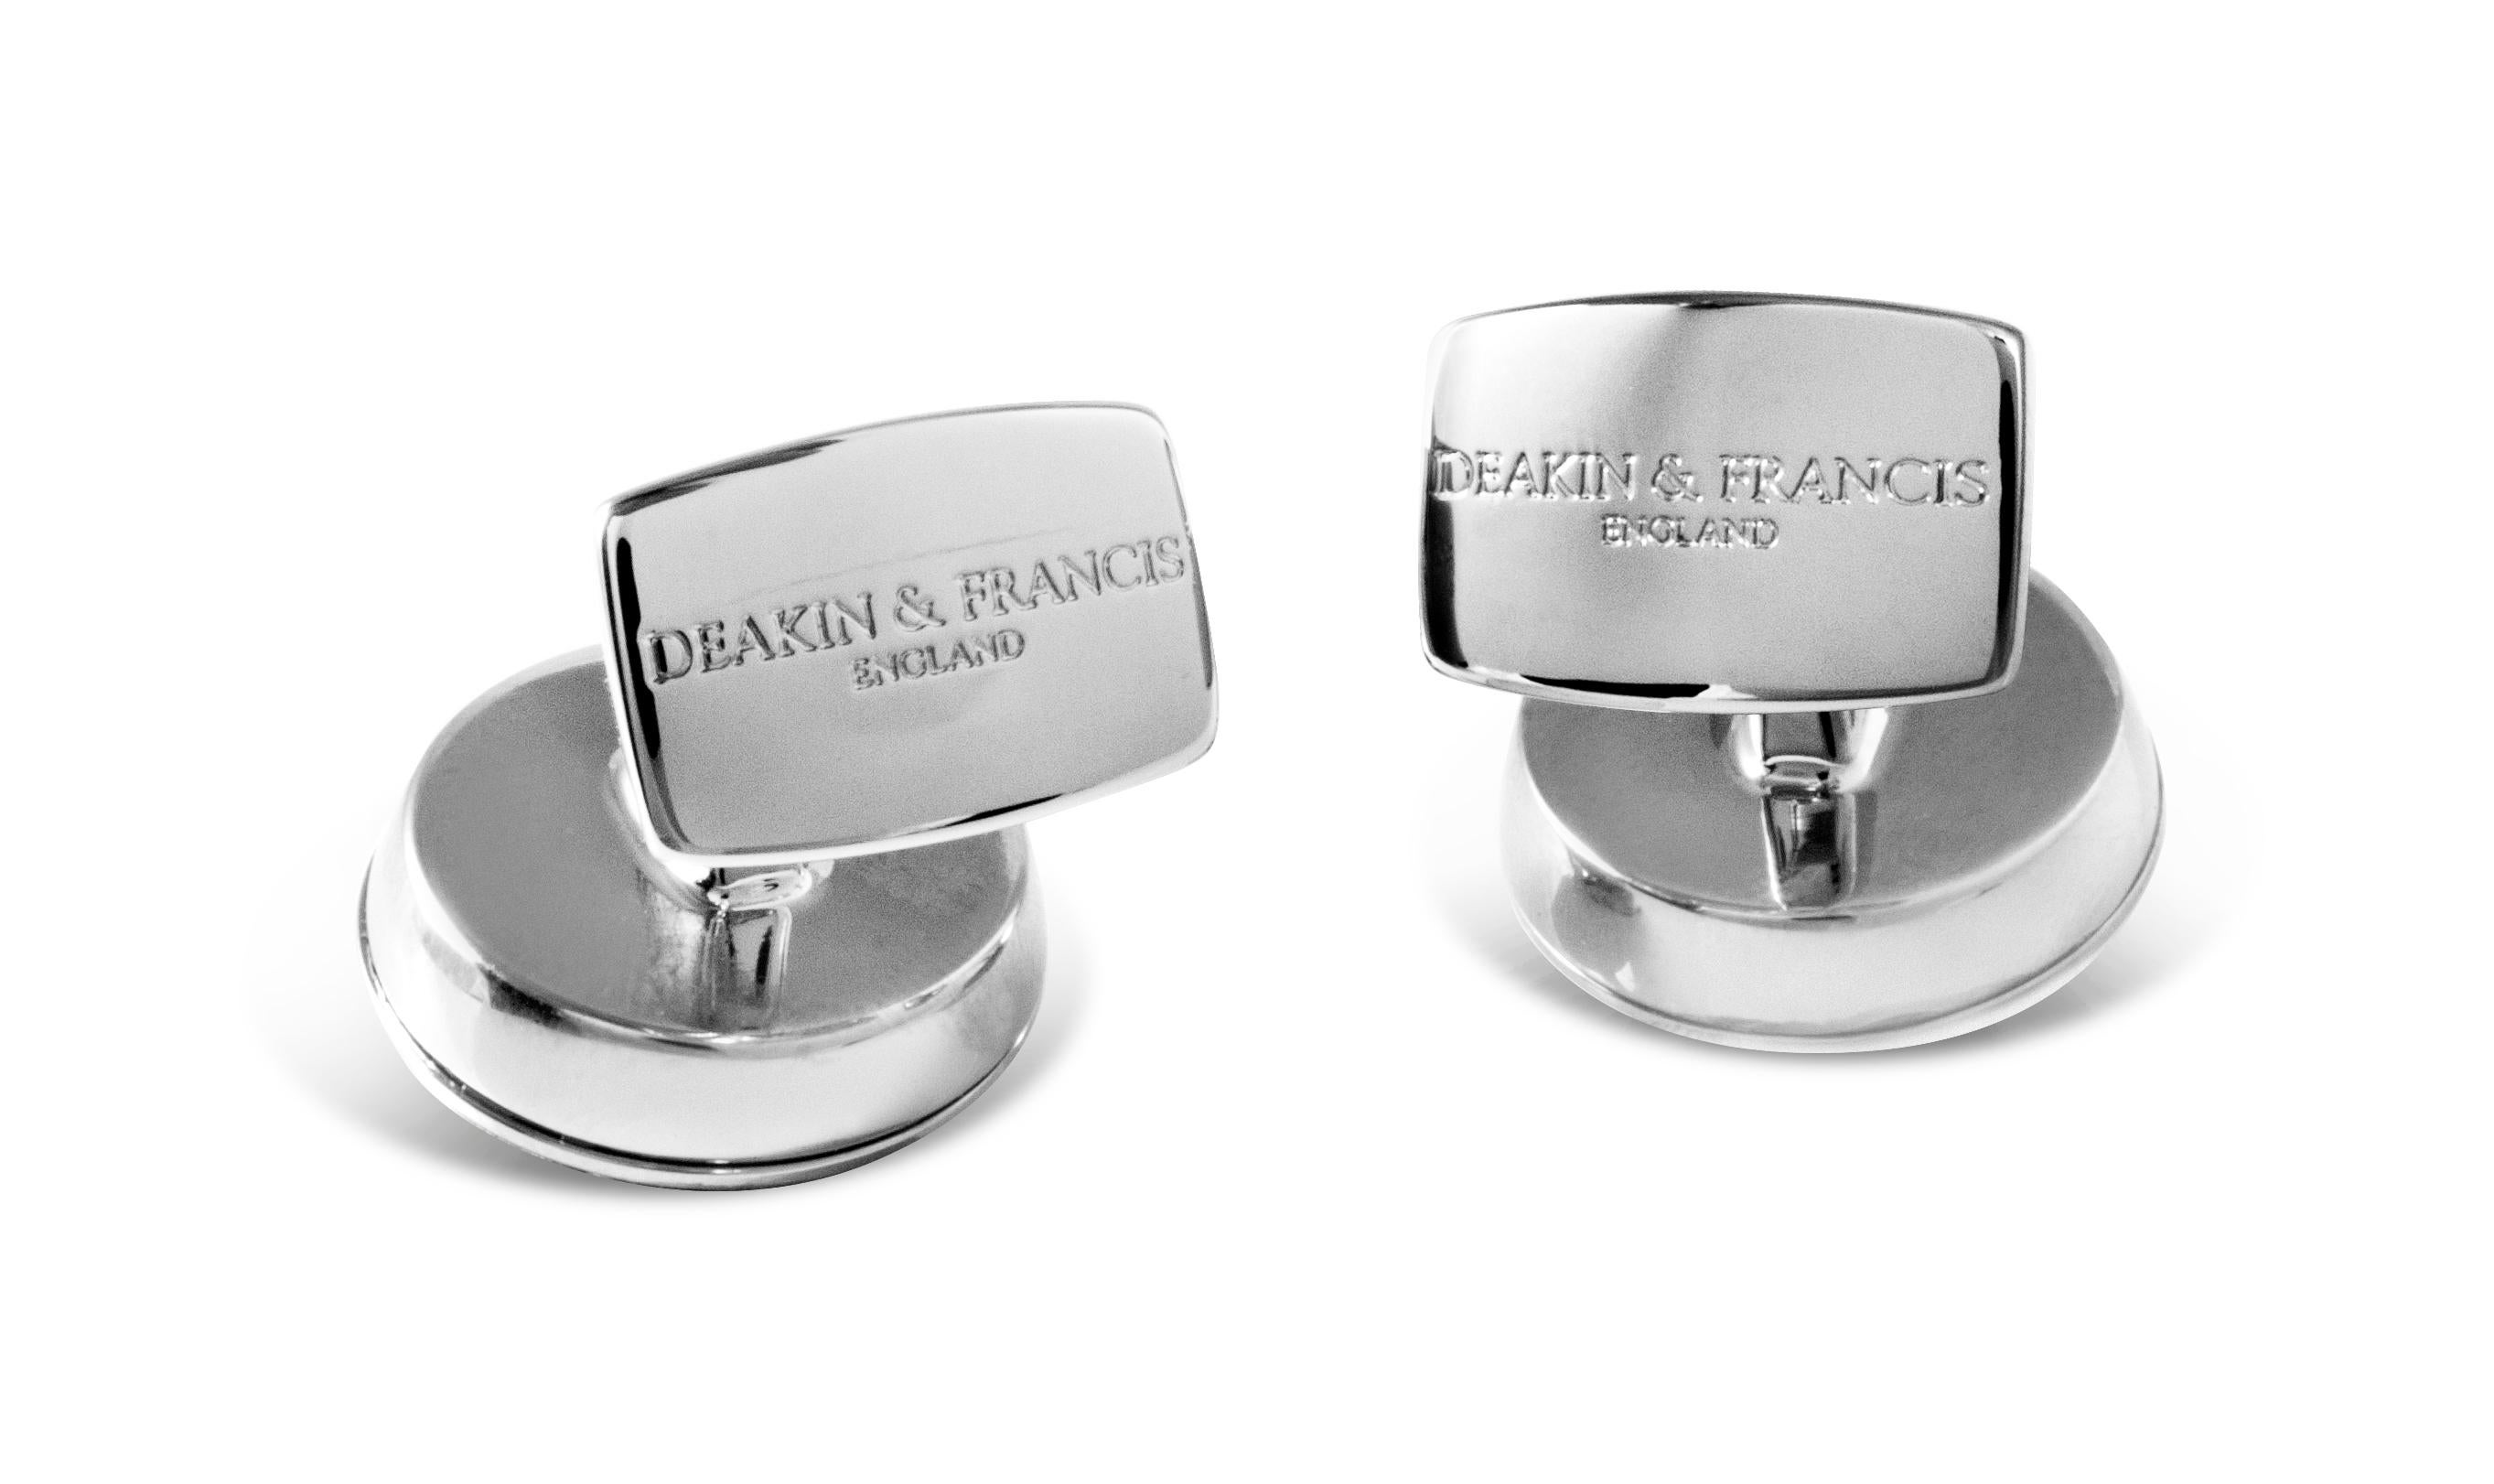 DEAKIN & FRANCIS, Piccadilly Arcade, London

Get a hole in one! Whether you are crazy about golf or passionate about putting, these golf cufflinks feature a detailed dimpled golf ball and sleek golf club. The perfect way to enjoy your passion on and